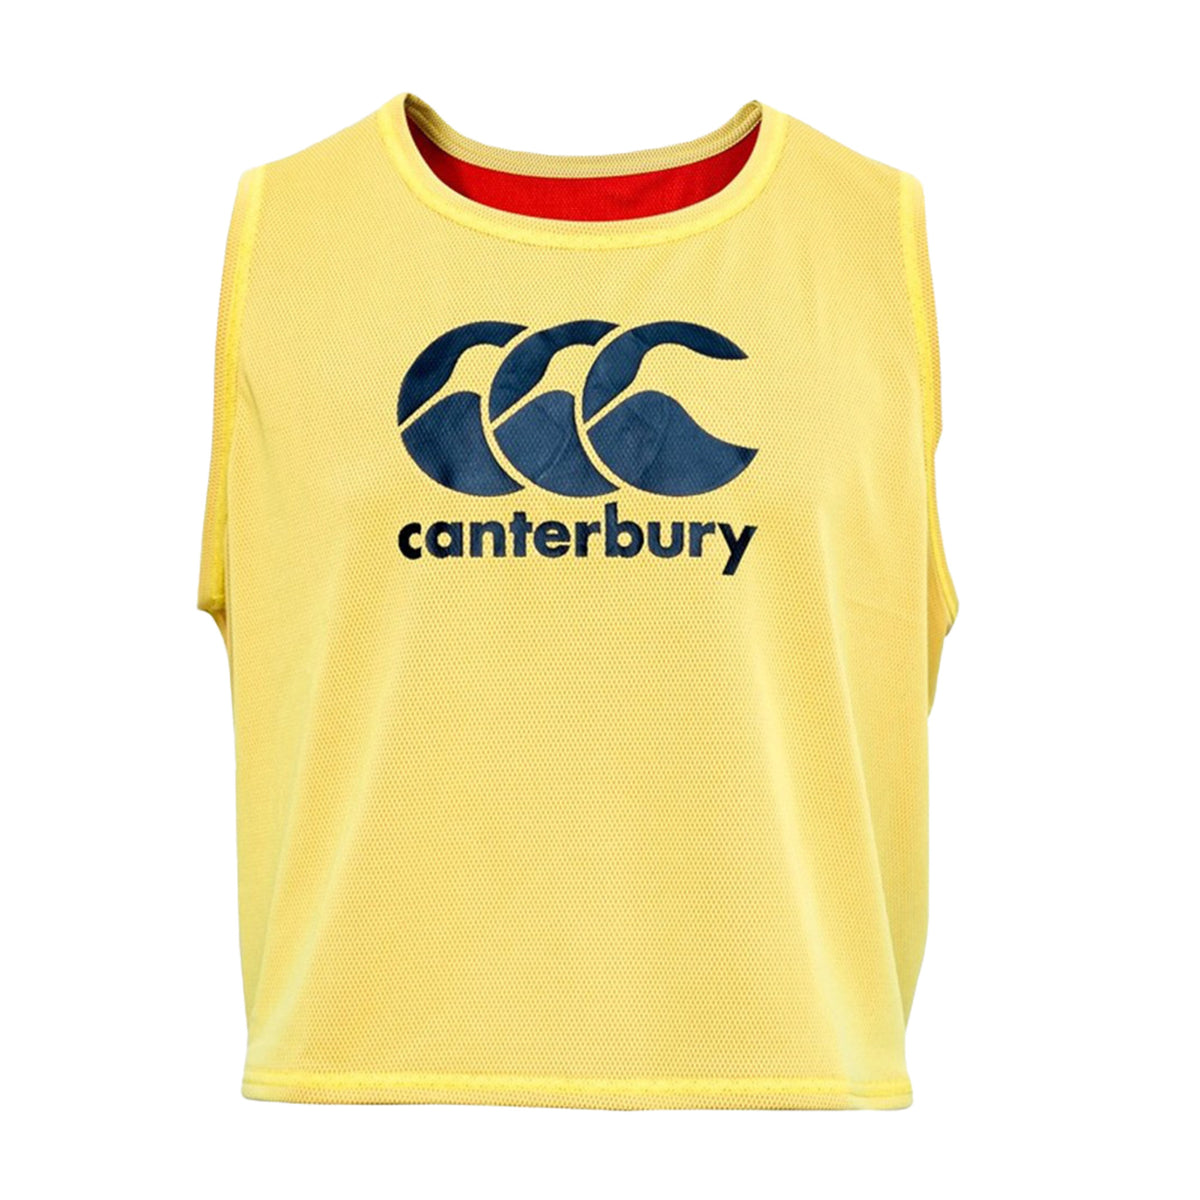 Canterbury CCC Reversible Rugby Flag Bib - Adult Unisex Sizing S-L - Yellow